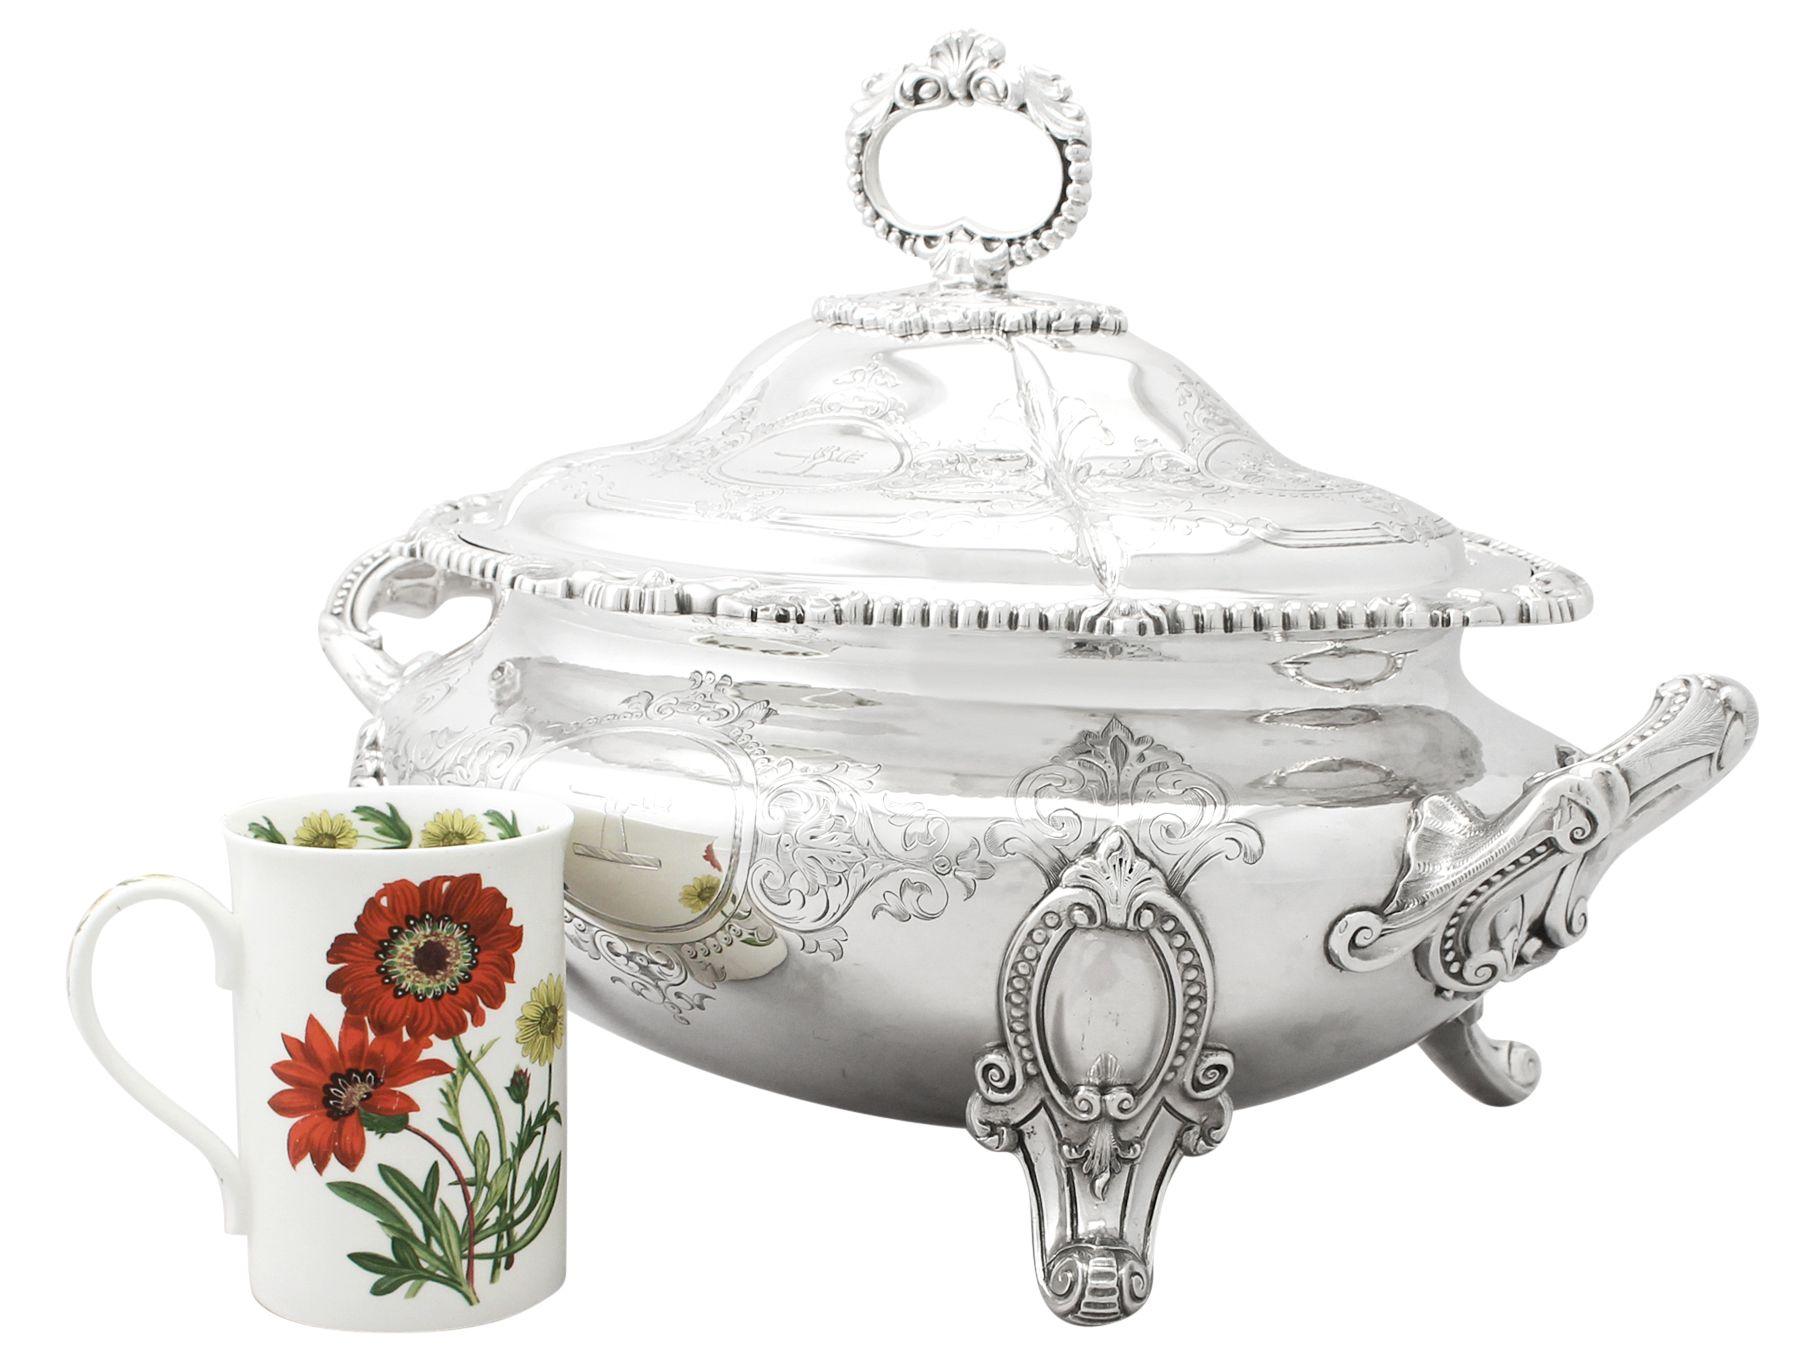 An exceptional, fine and impressive, large antique Victorian English sterling silver soup tureen; an addition to our dining silverware collection

This exceptional antique Victorian sterling silver dish has an oval rounded form.

The surface of